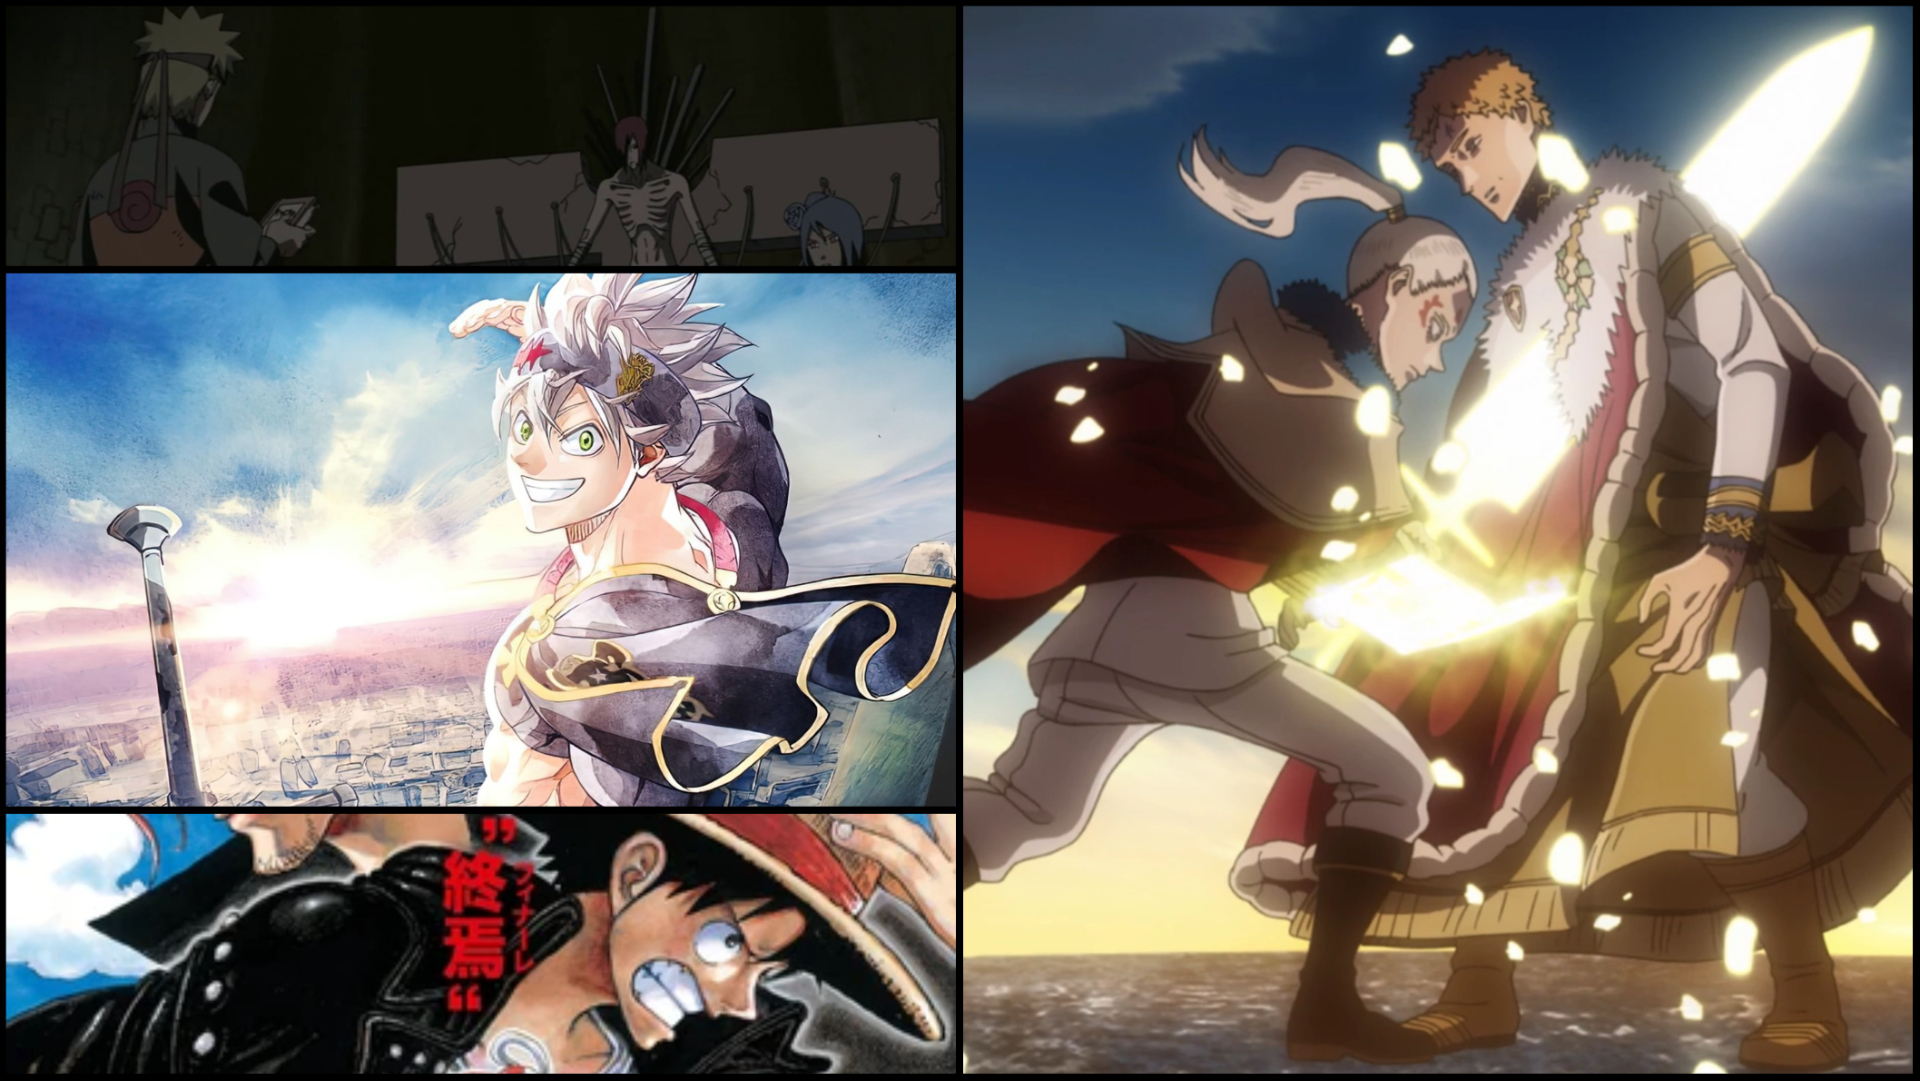 Black Clover Movie 2023 compared in relation to One Piece and Naruto movies